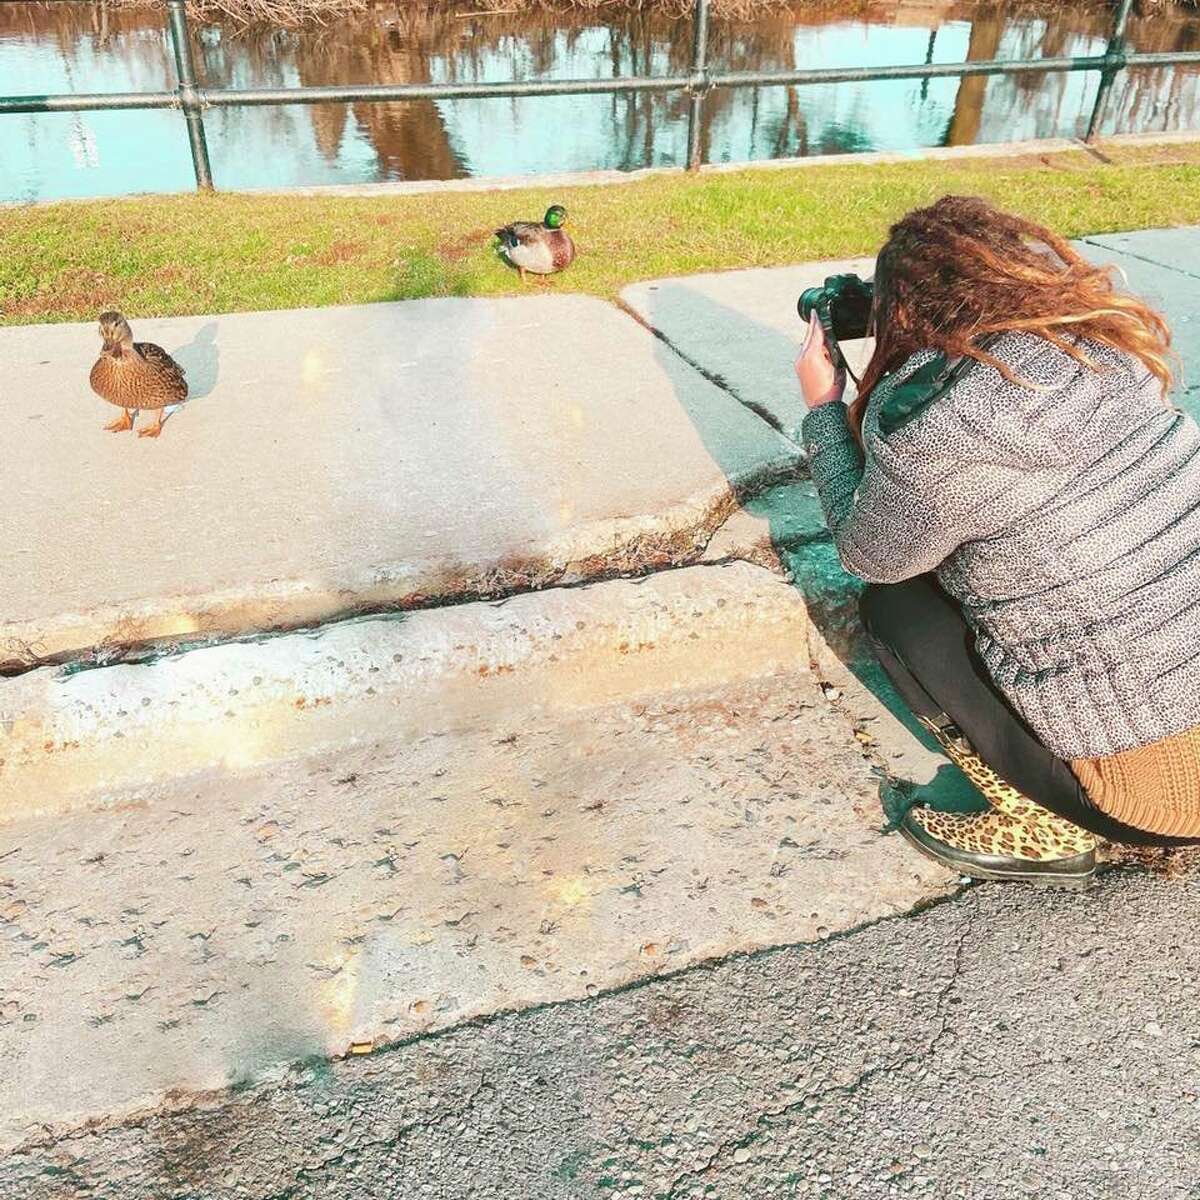 Vaughn is pictured taking a picture of a duck. As well as animals, she enjoys photographing families, nature scenes and more. (Courtesy photo)